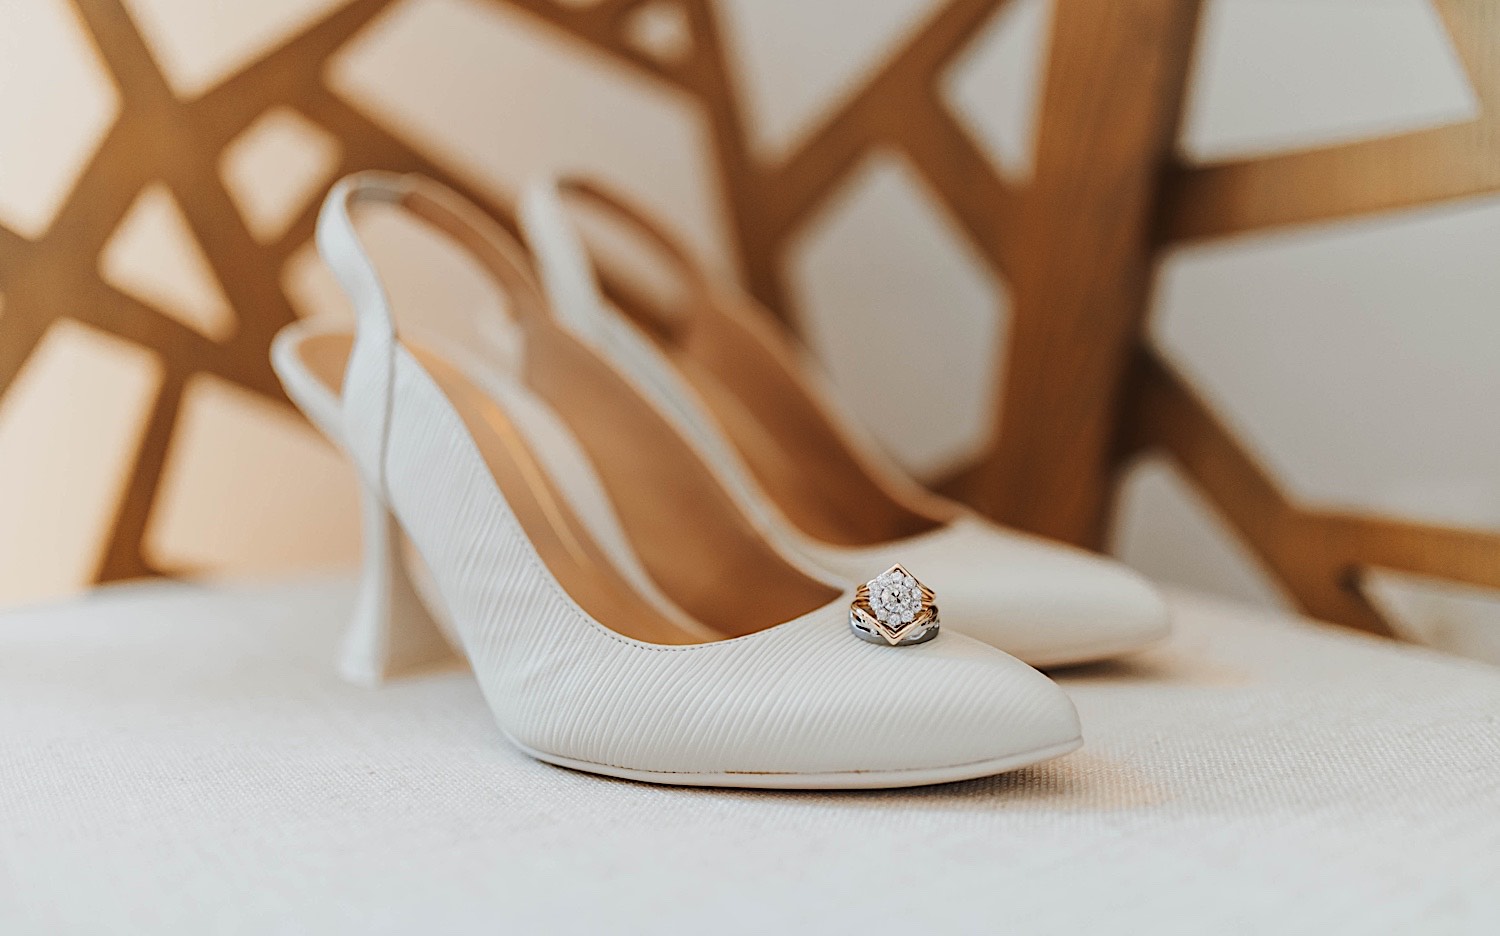 A wedding ring sits on a pair of white women's shoes which rest on a chair